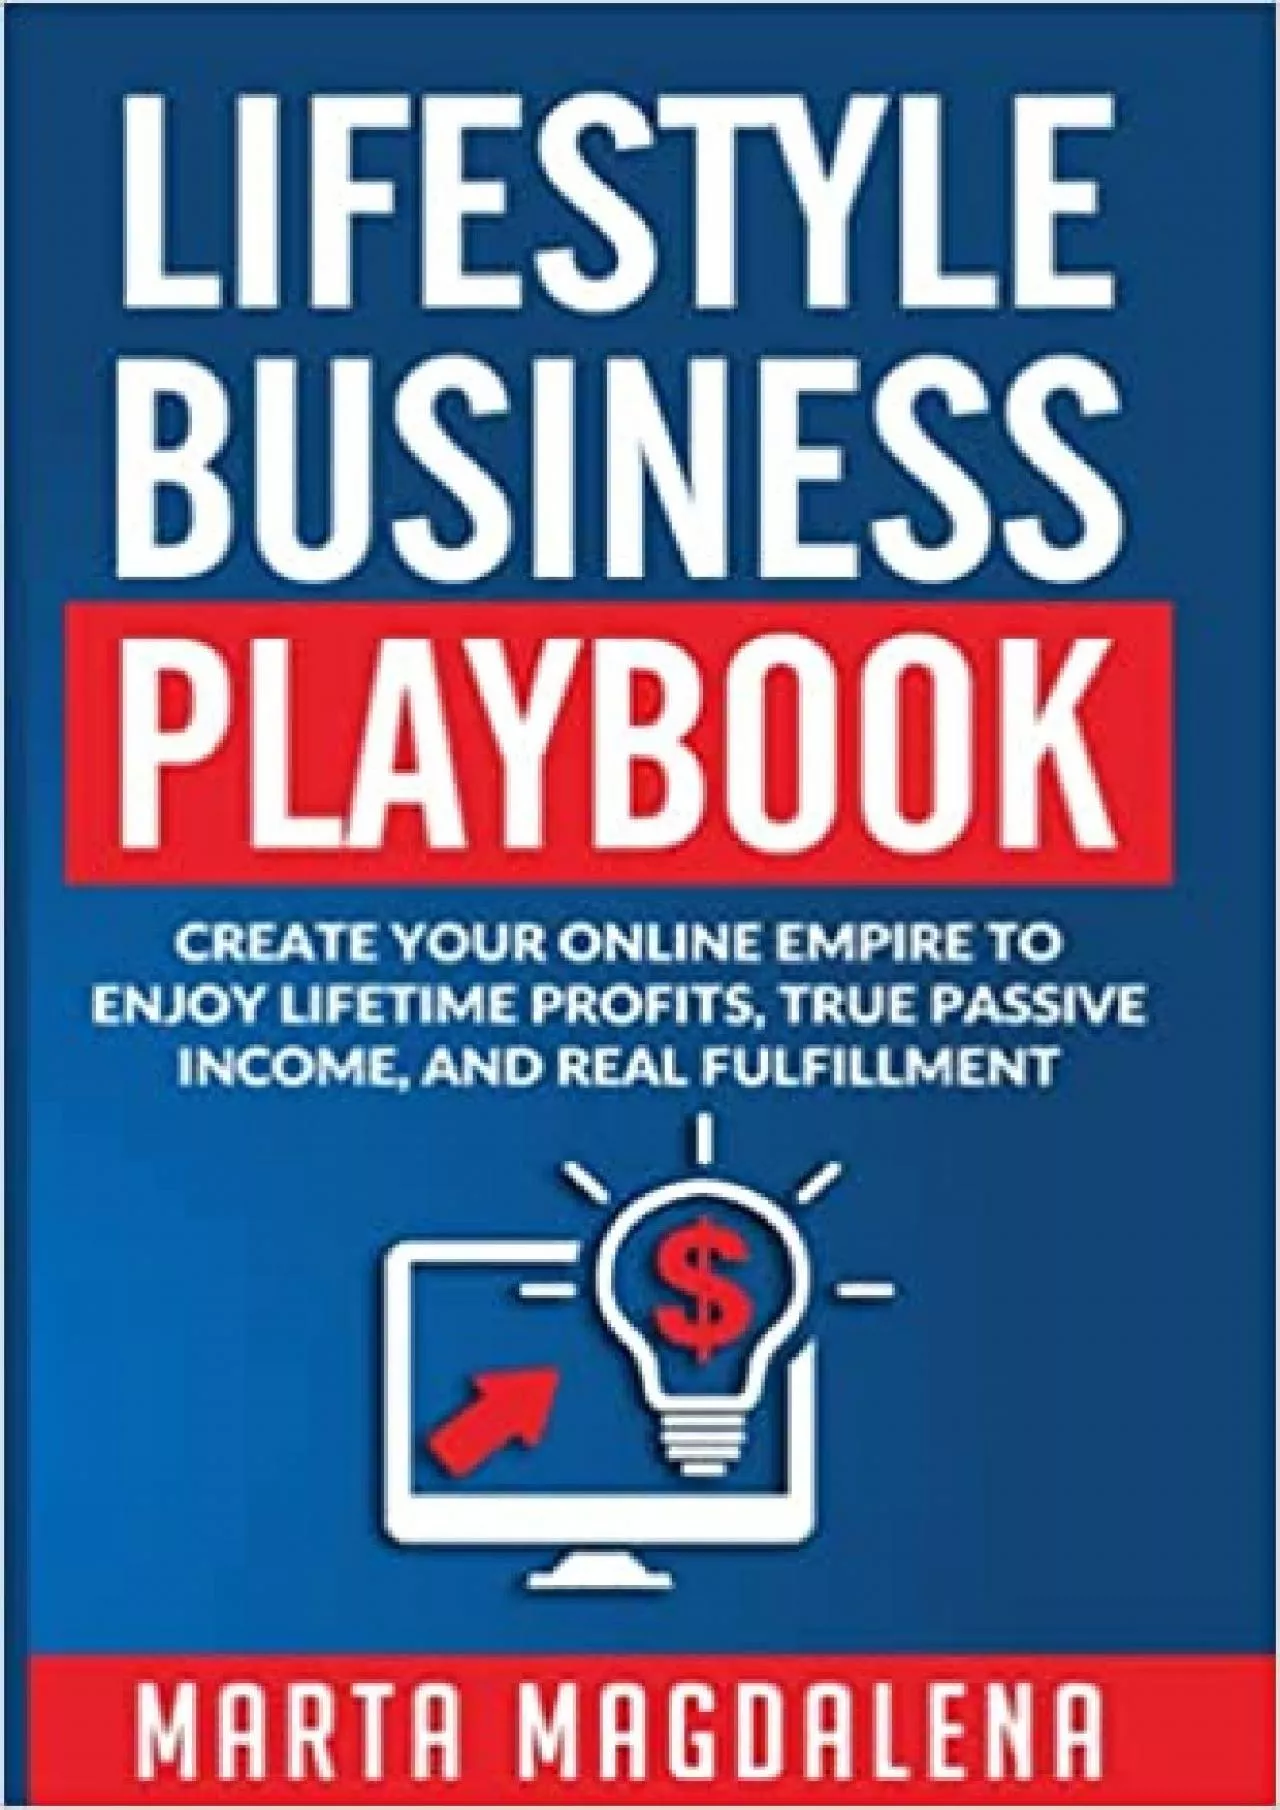 Lifestyle Business Playbook Create Your Online Empire to Enjoy True Passive Income Lifetime